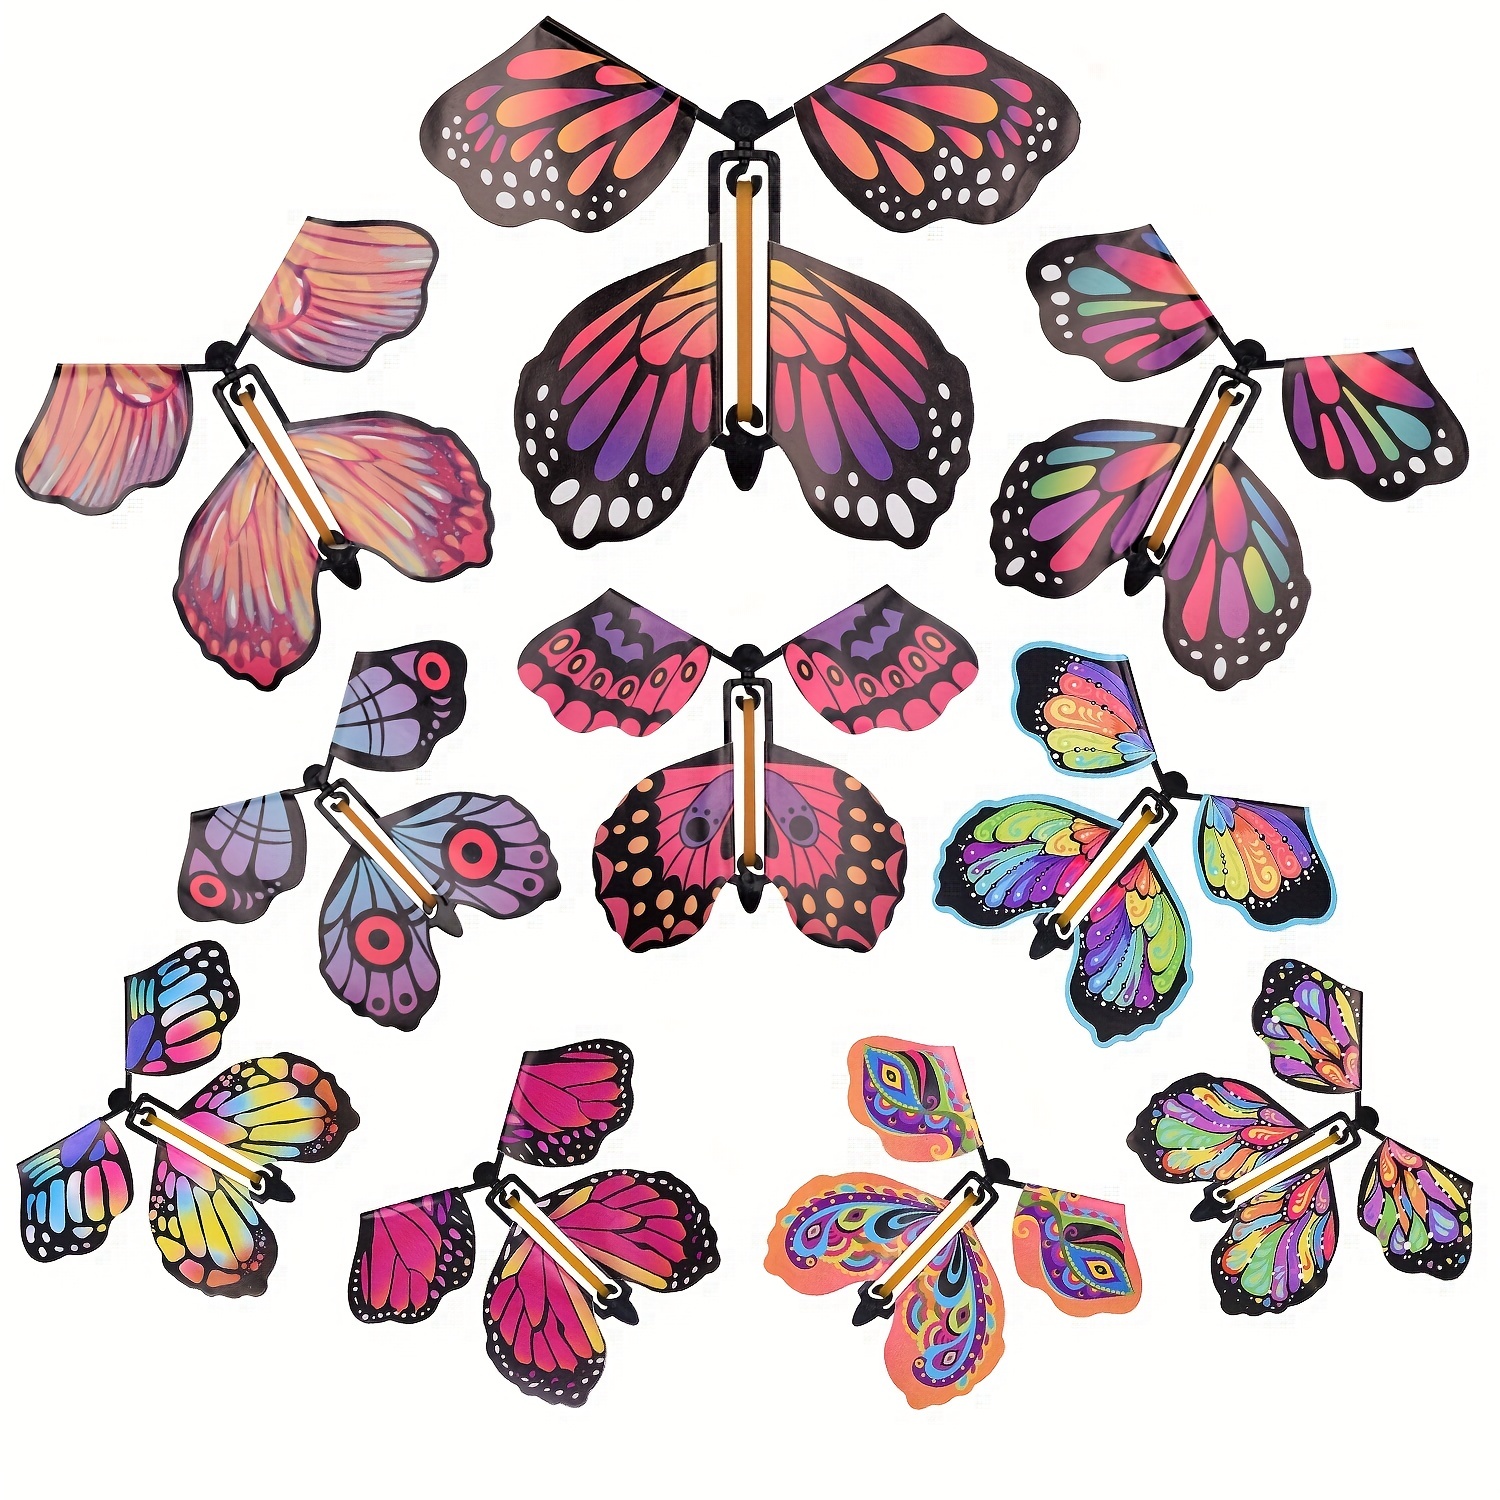 Scettar 40 PCS Magic Flying Butterfly, 20 Different Pattern Fairy Flying  Toys Wind up Rubber Band Powered Butterfly Toys Decoration for Colorful